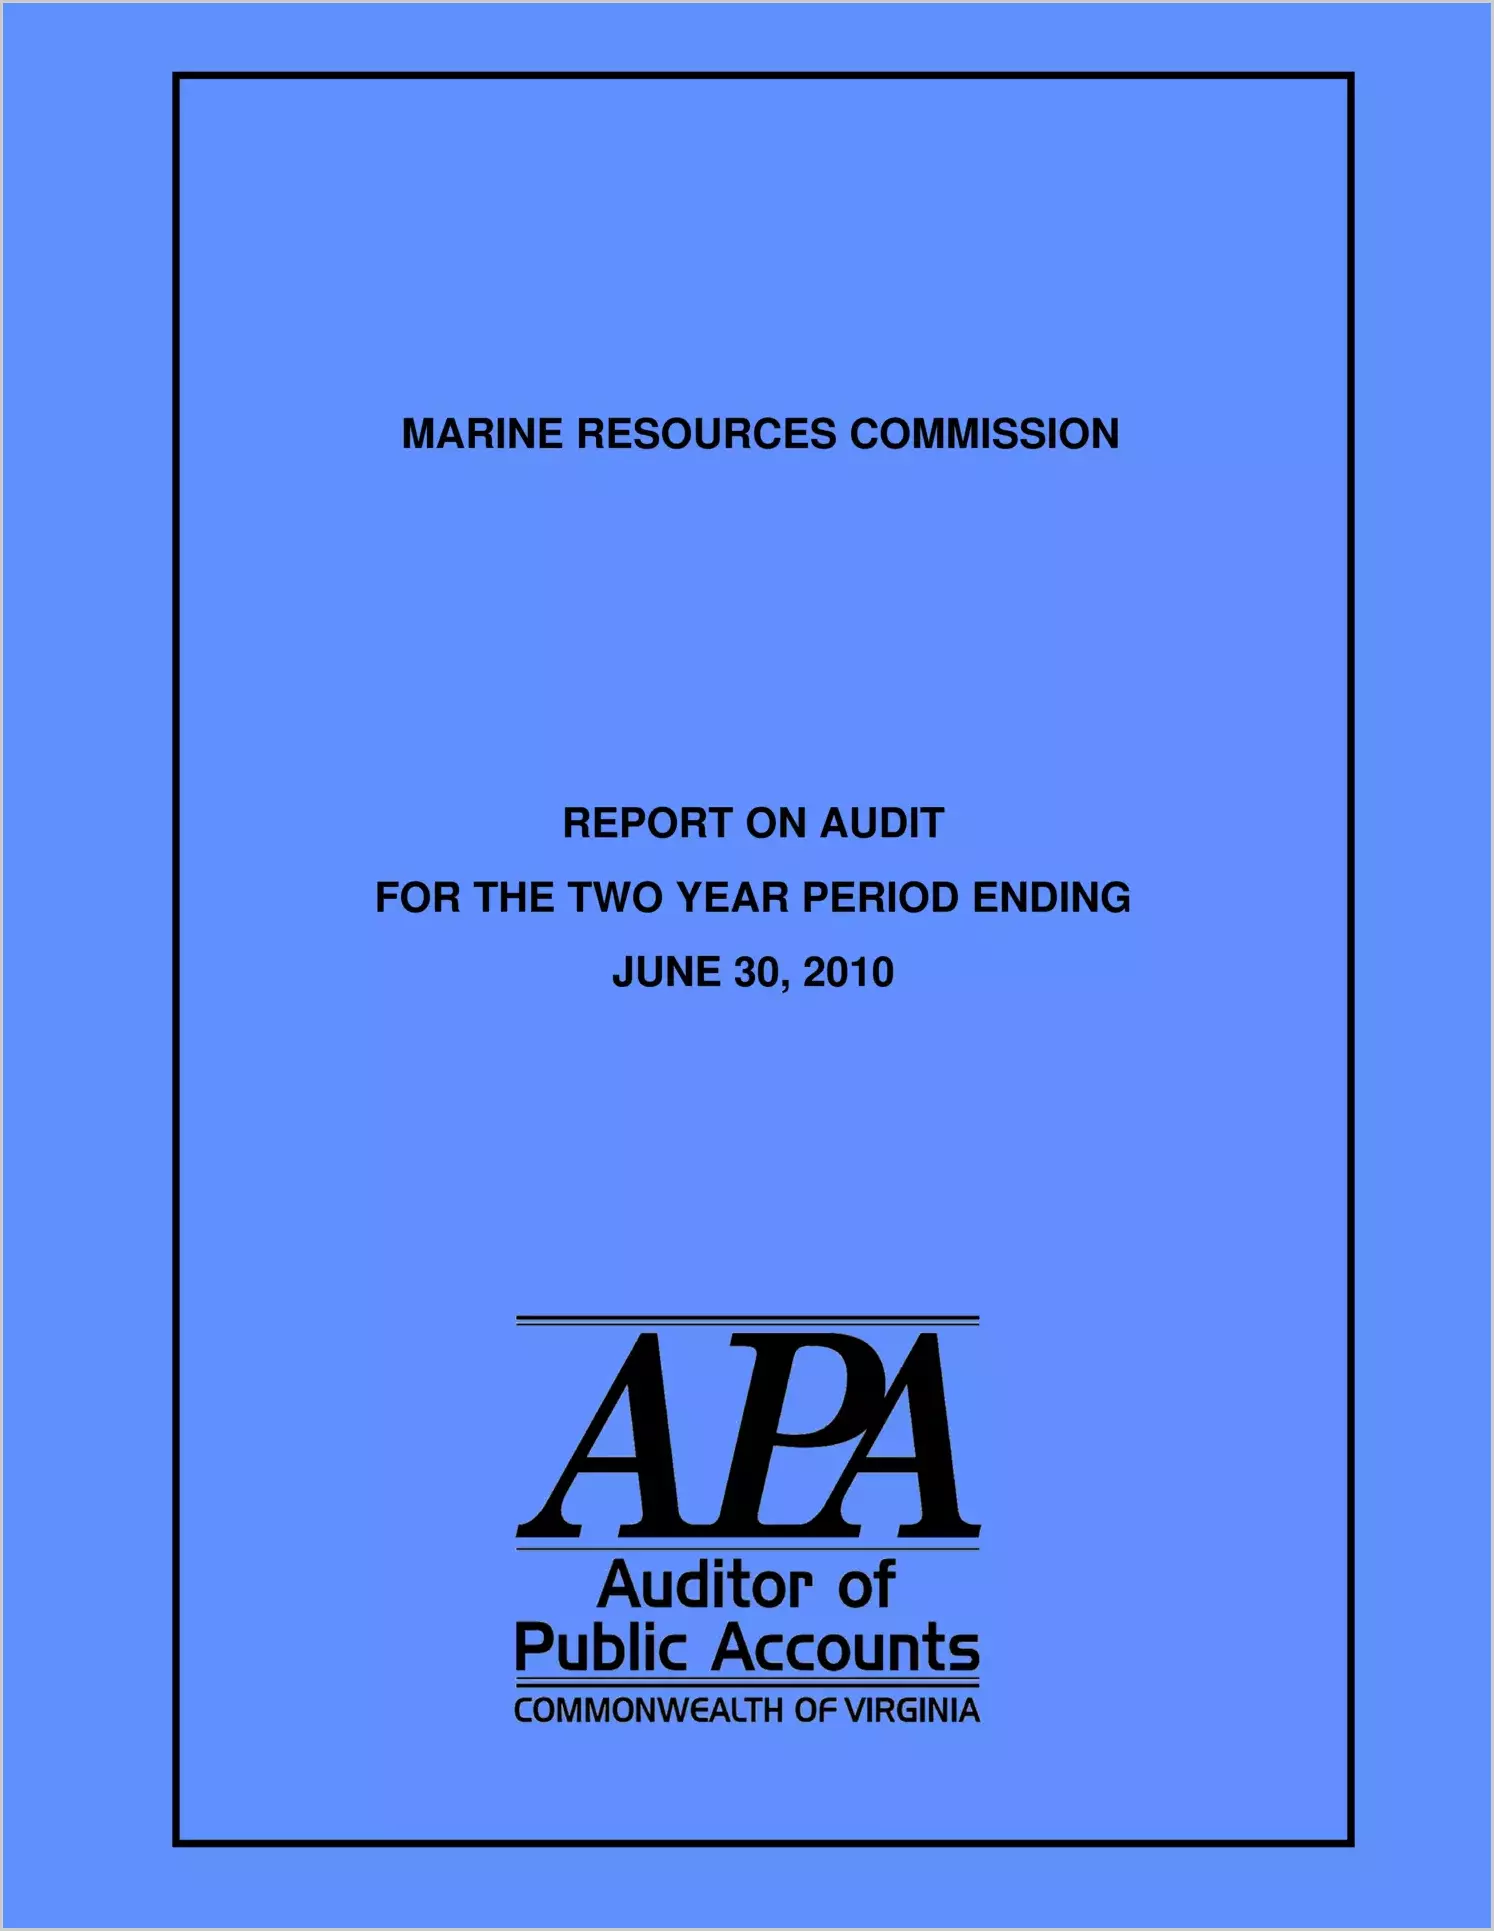 Virginia Marine Resources Commission Report on Audit for two-year period ended June 30, 2010